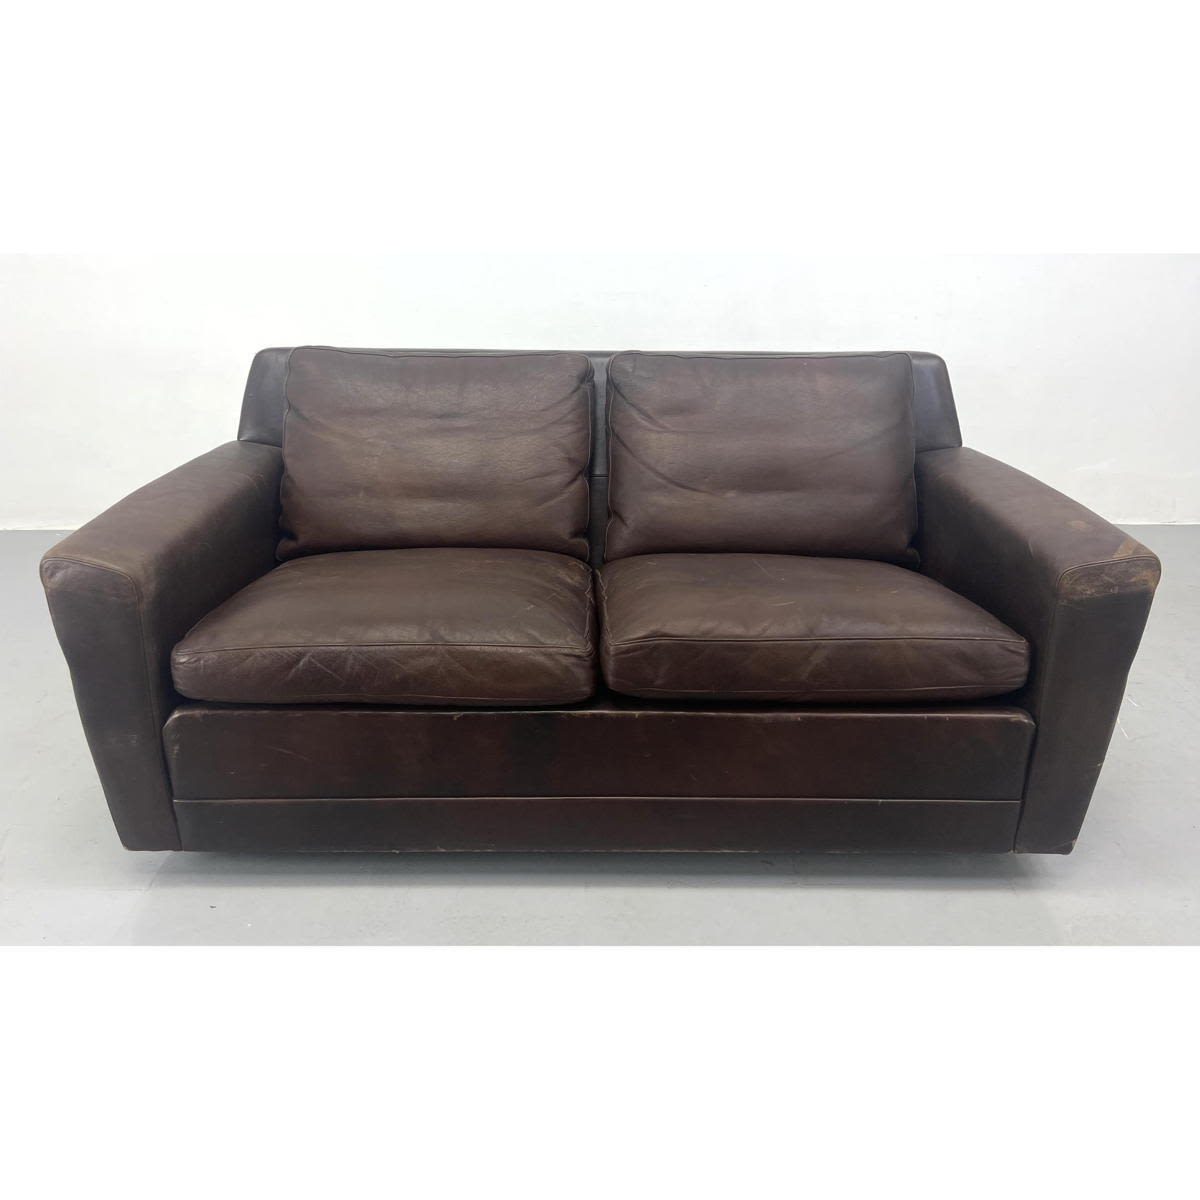 Art Deco Style Leather Love Seat